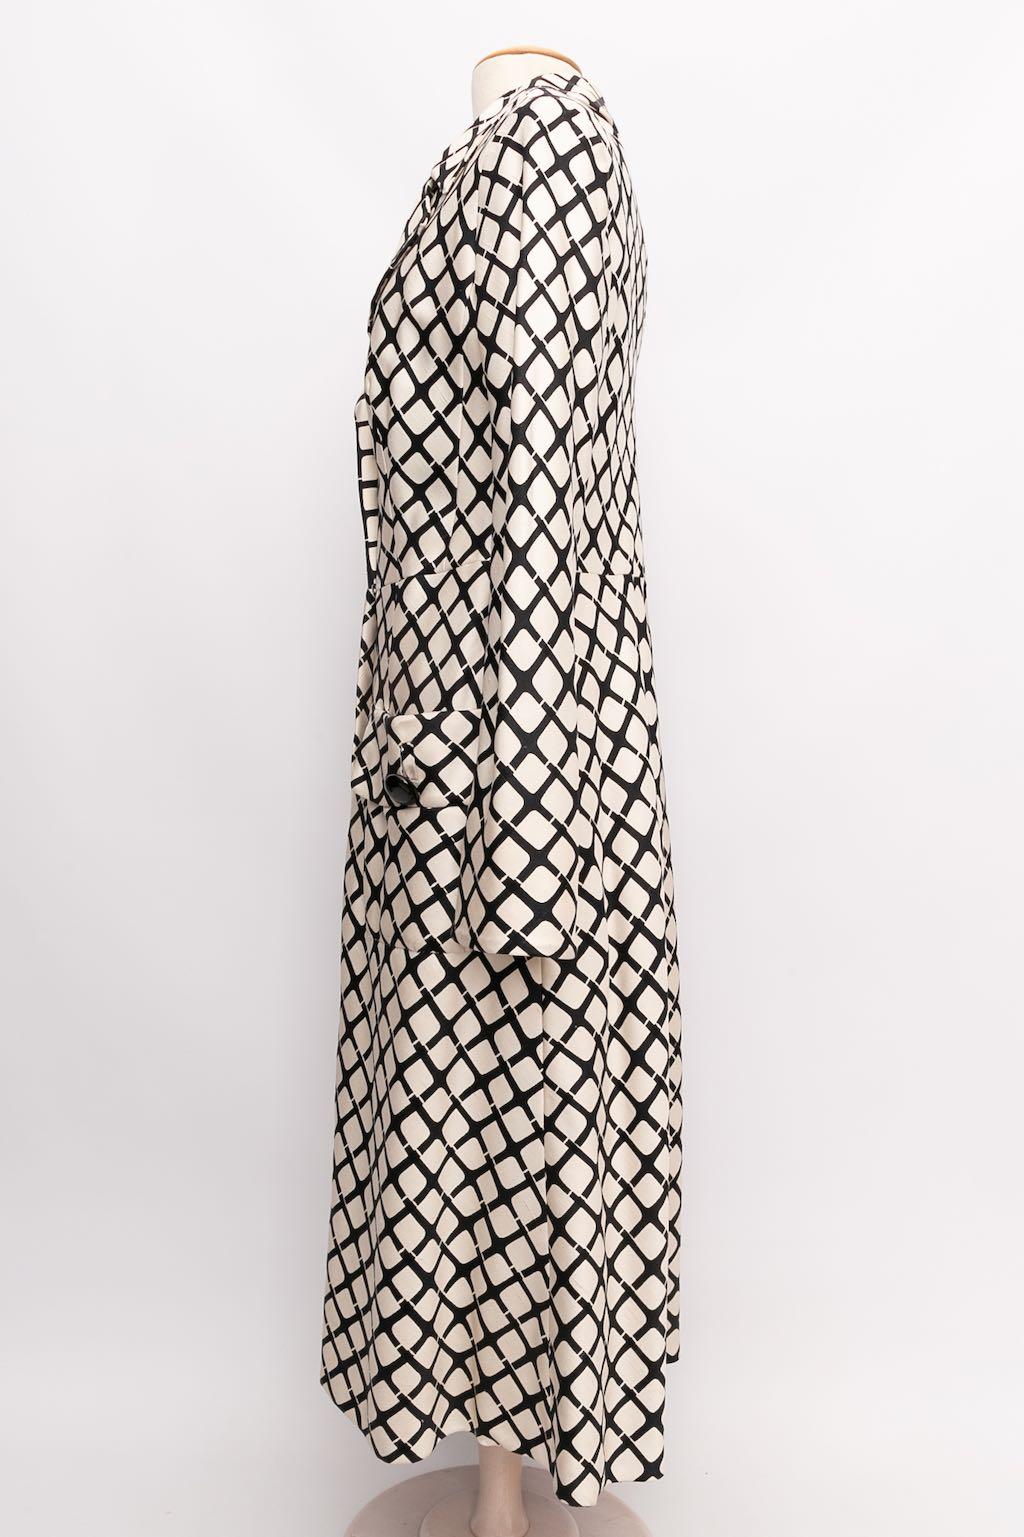 Pierre Balmain Haute Couture (Ribbon N°148889) Long silk coat with a black and white pattern

Additional information: 
Dimensions: Shoulders: 48 cm (18.9